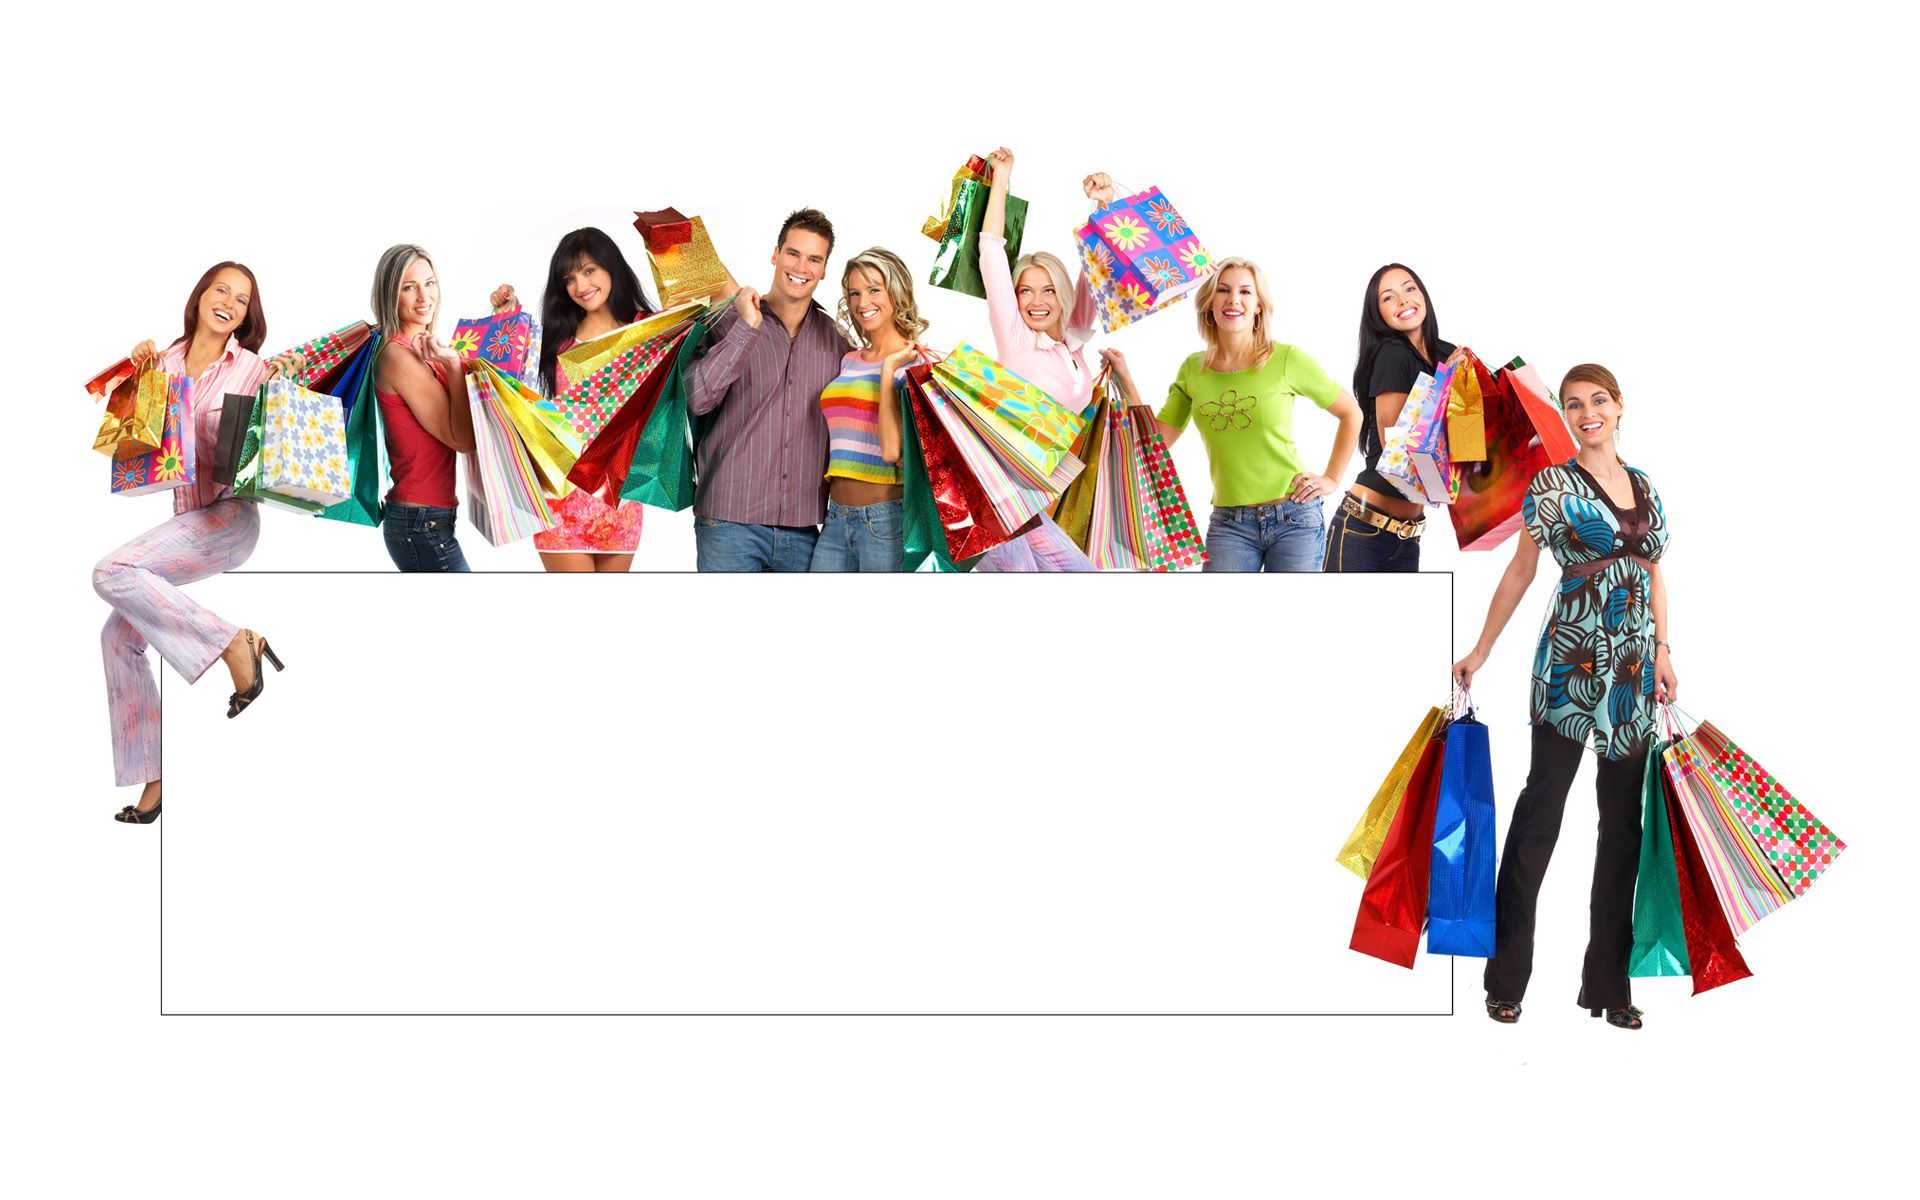 Shopping Hd Images Free Download - werohmedia